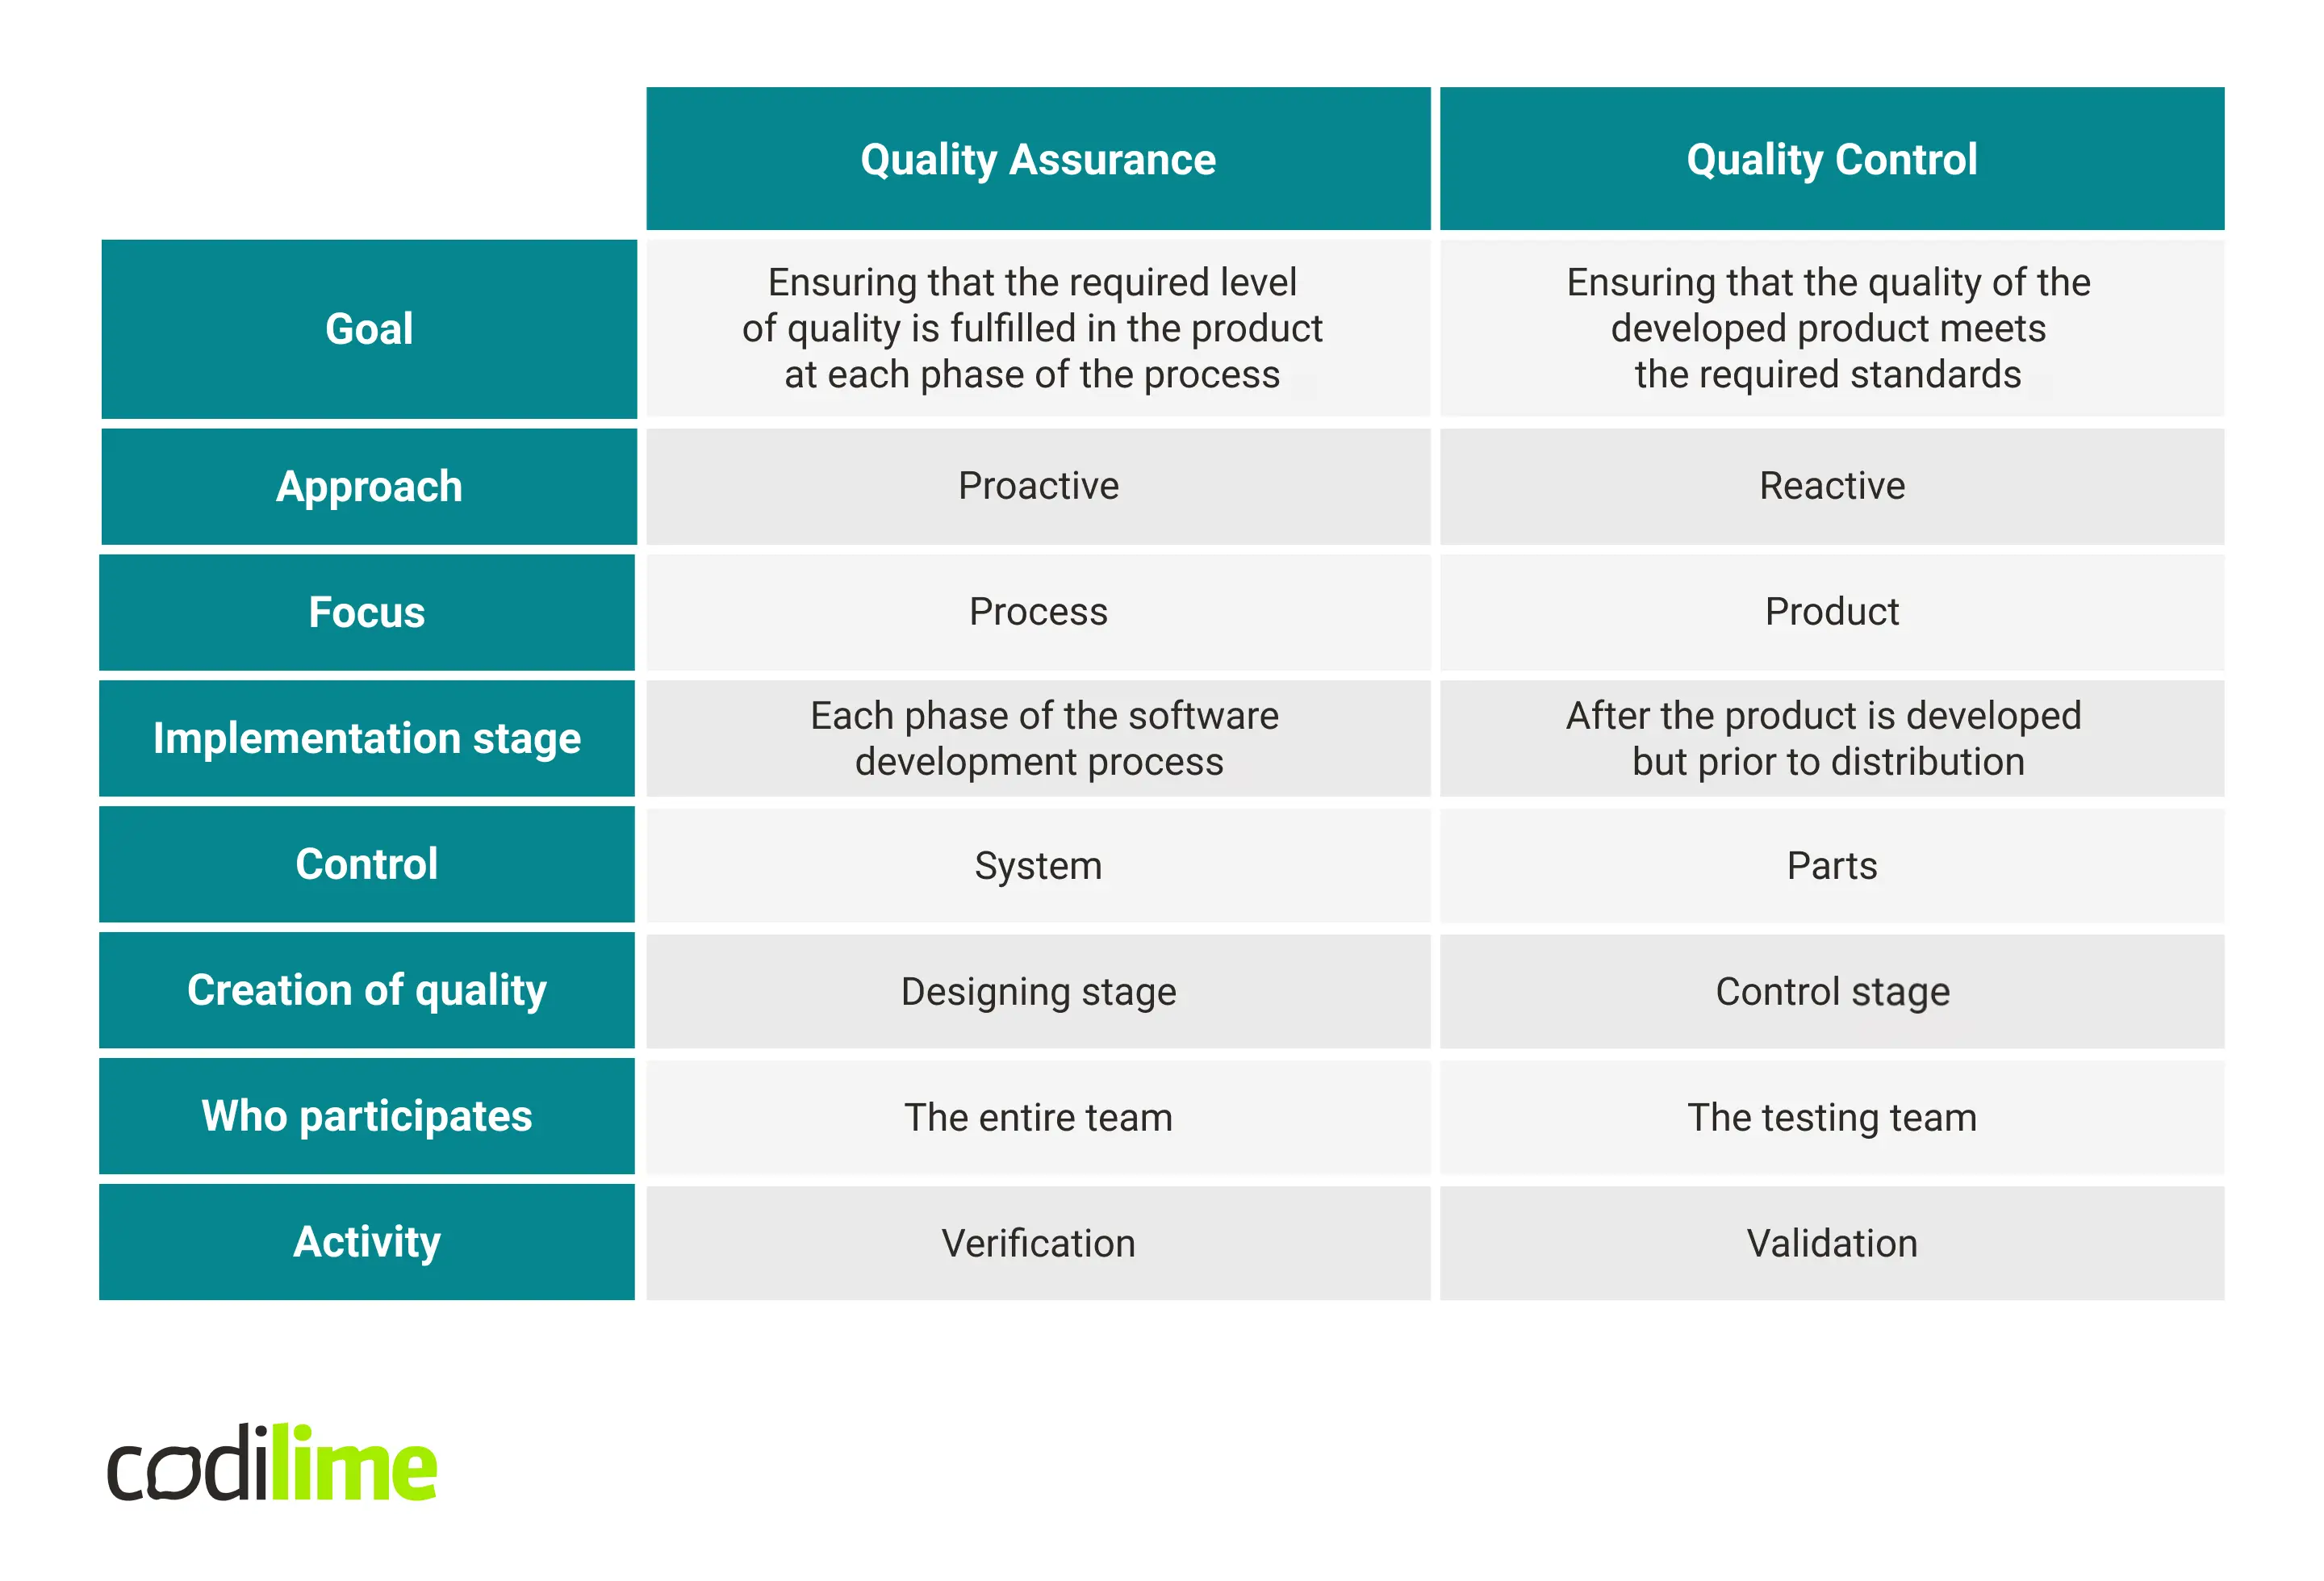 The differences between Quality Assurance and Quality Control 